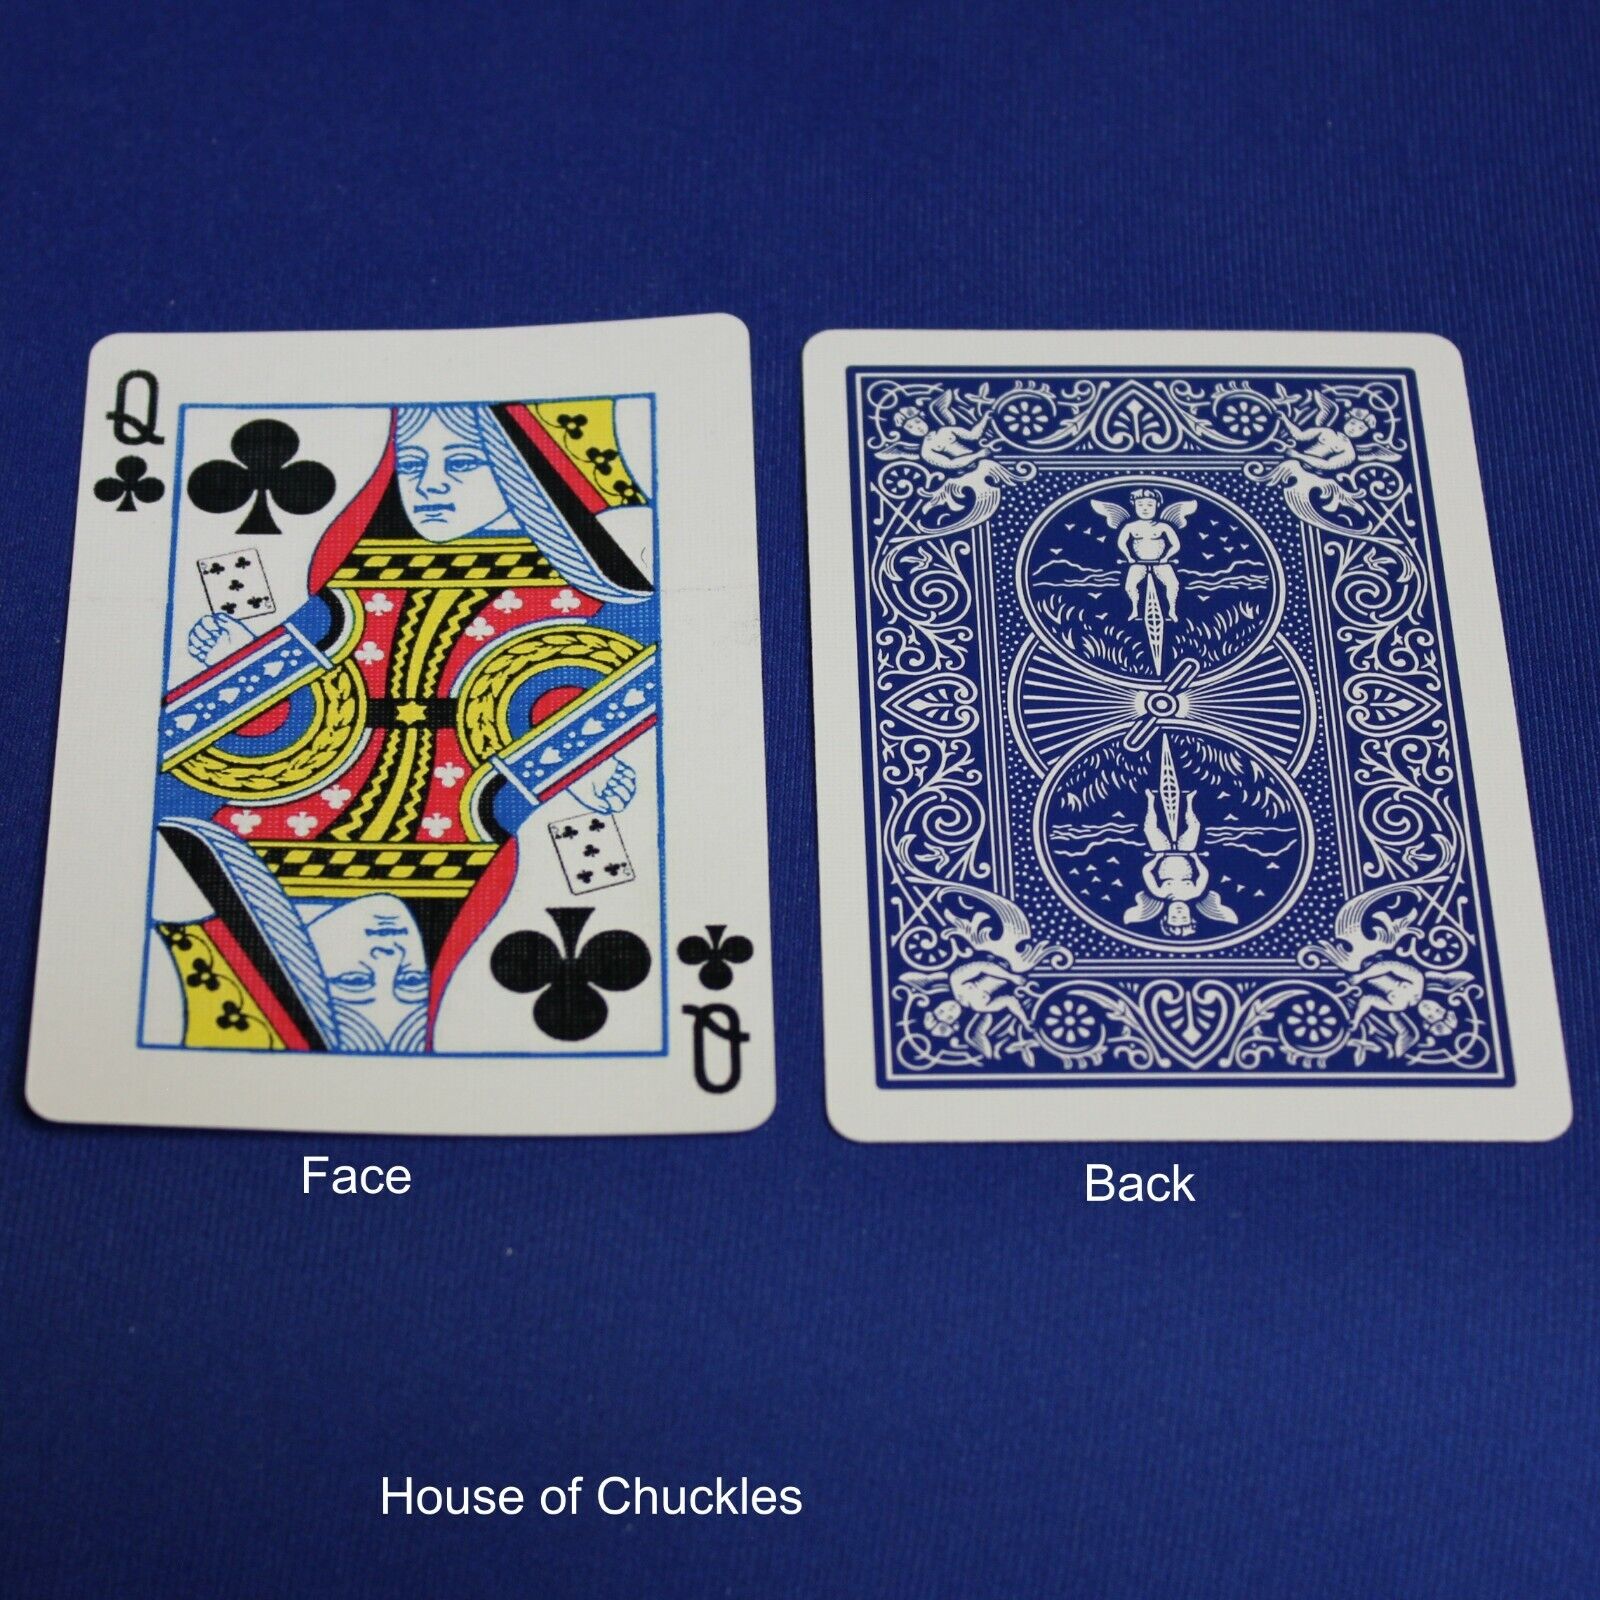 Queen of Clubs reveals 5 of Clubs - Blue Bicycle Gaff Playing Card